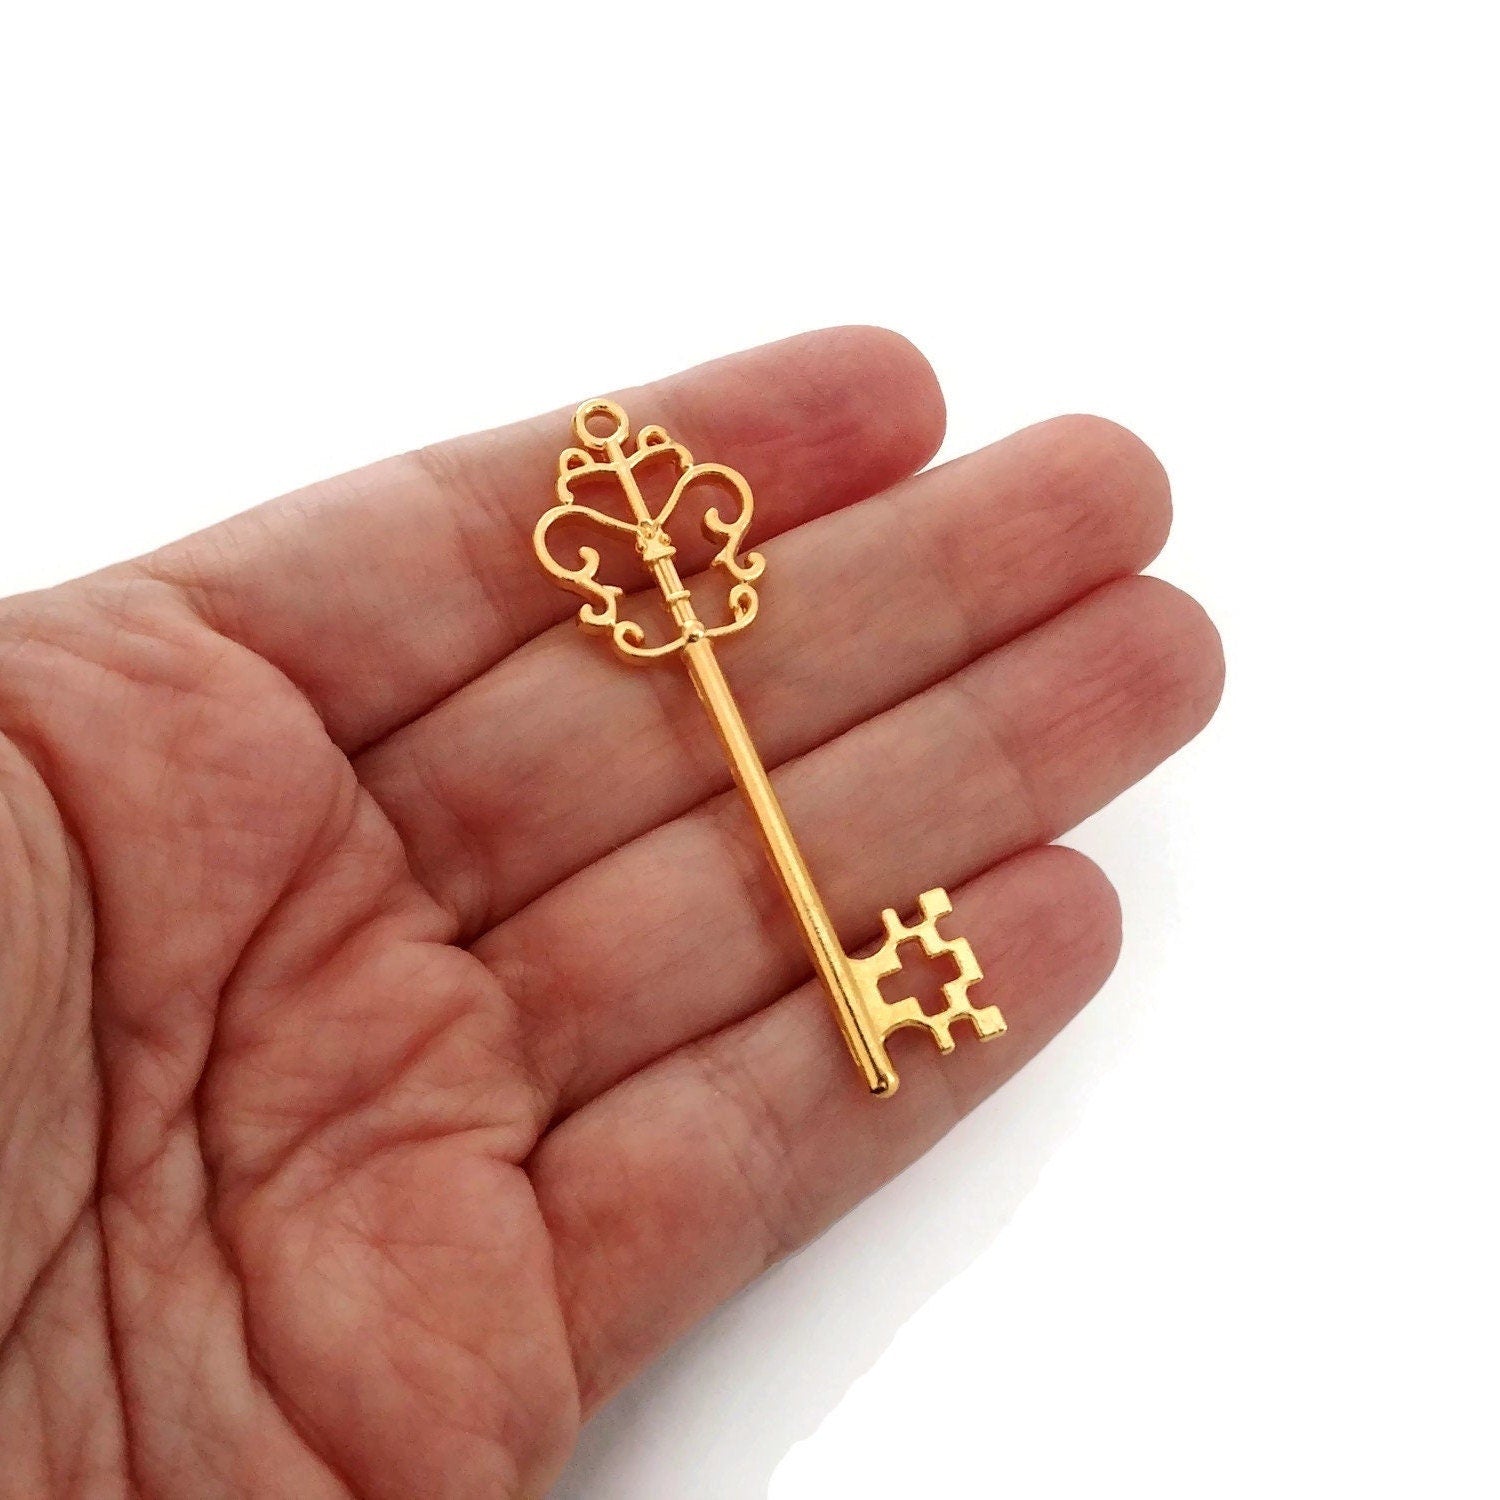 Large skeleton key charm, Hypoallergenic DIY necklace pendant, Victorian steampunk pendant, gold bronze silver plated charms